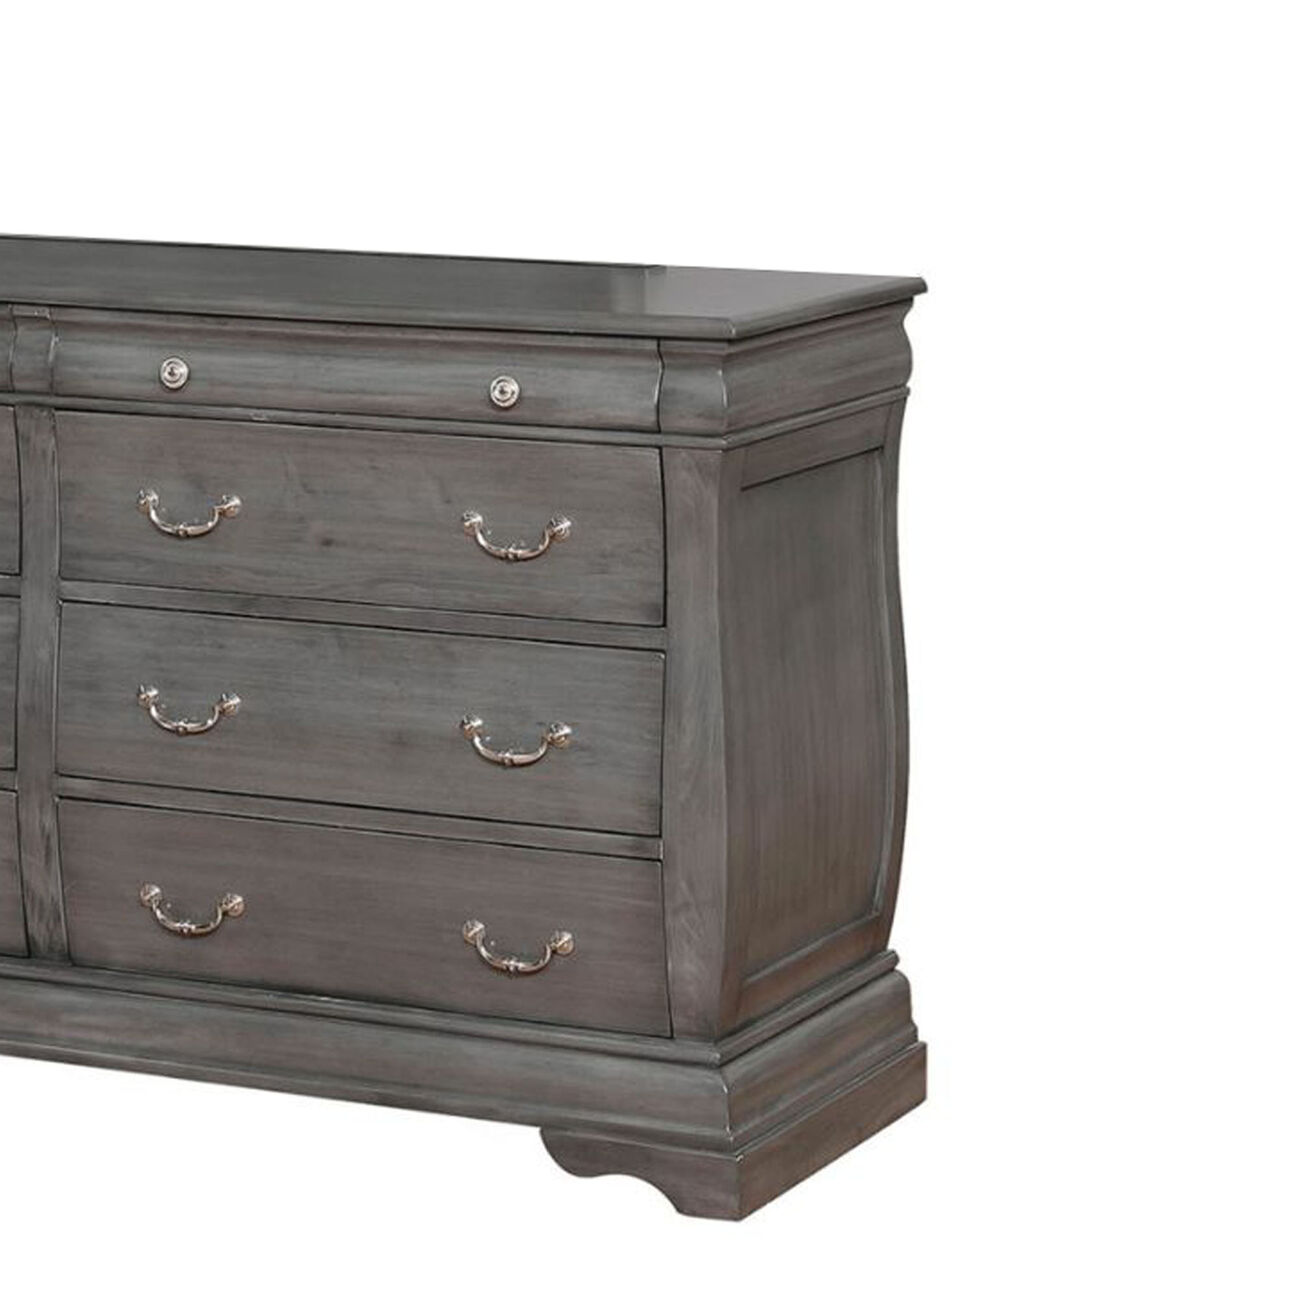 Transitional Wooden Dresser with 8 Drawers and Bracket Legs, Gray